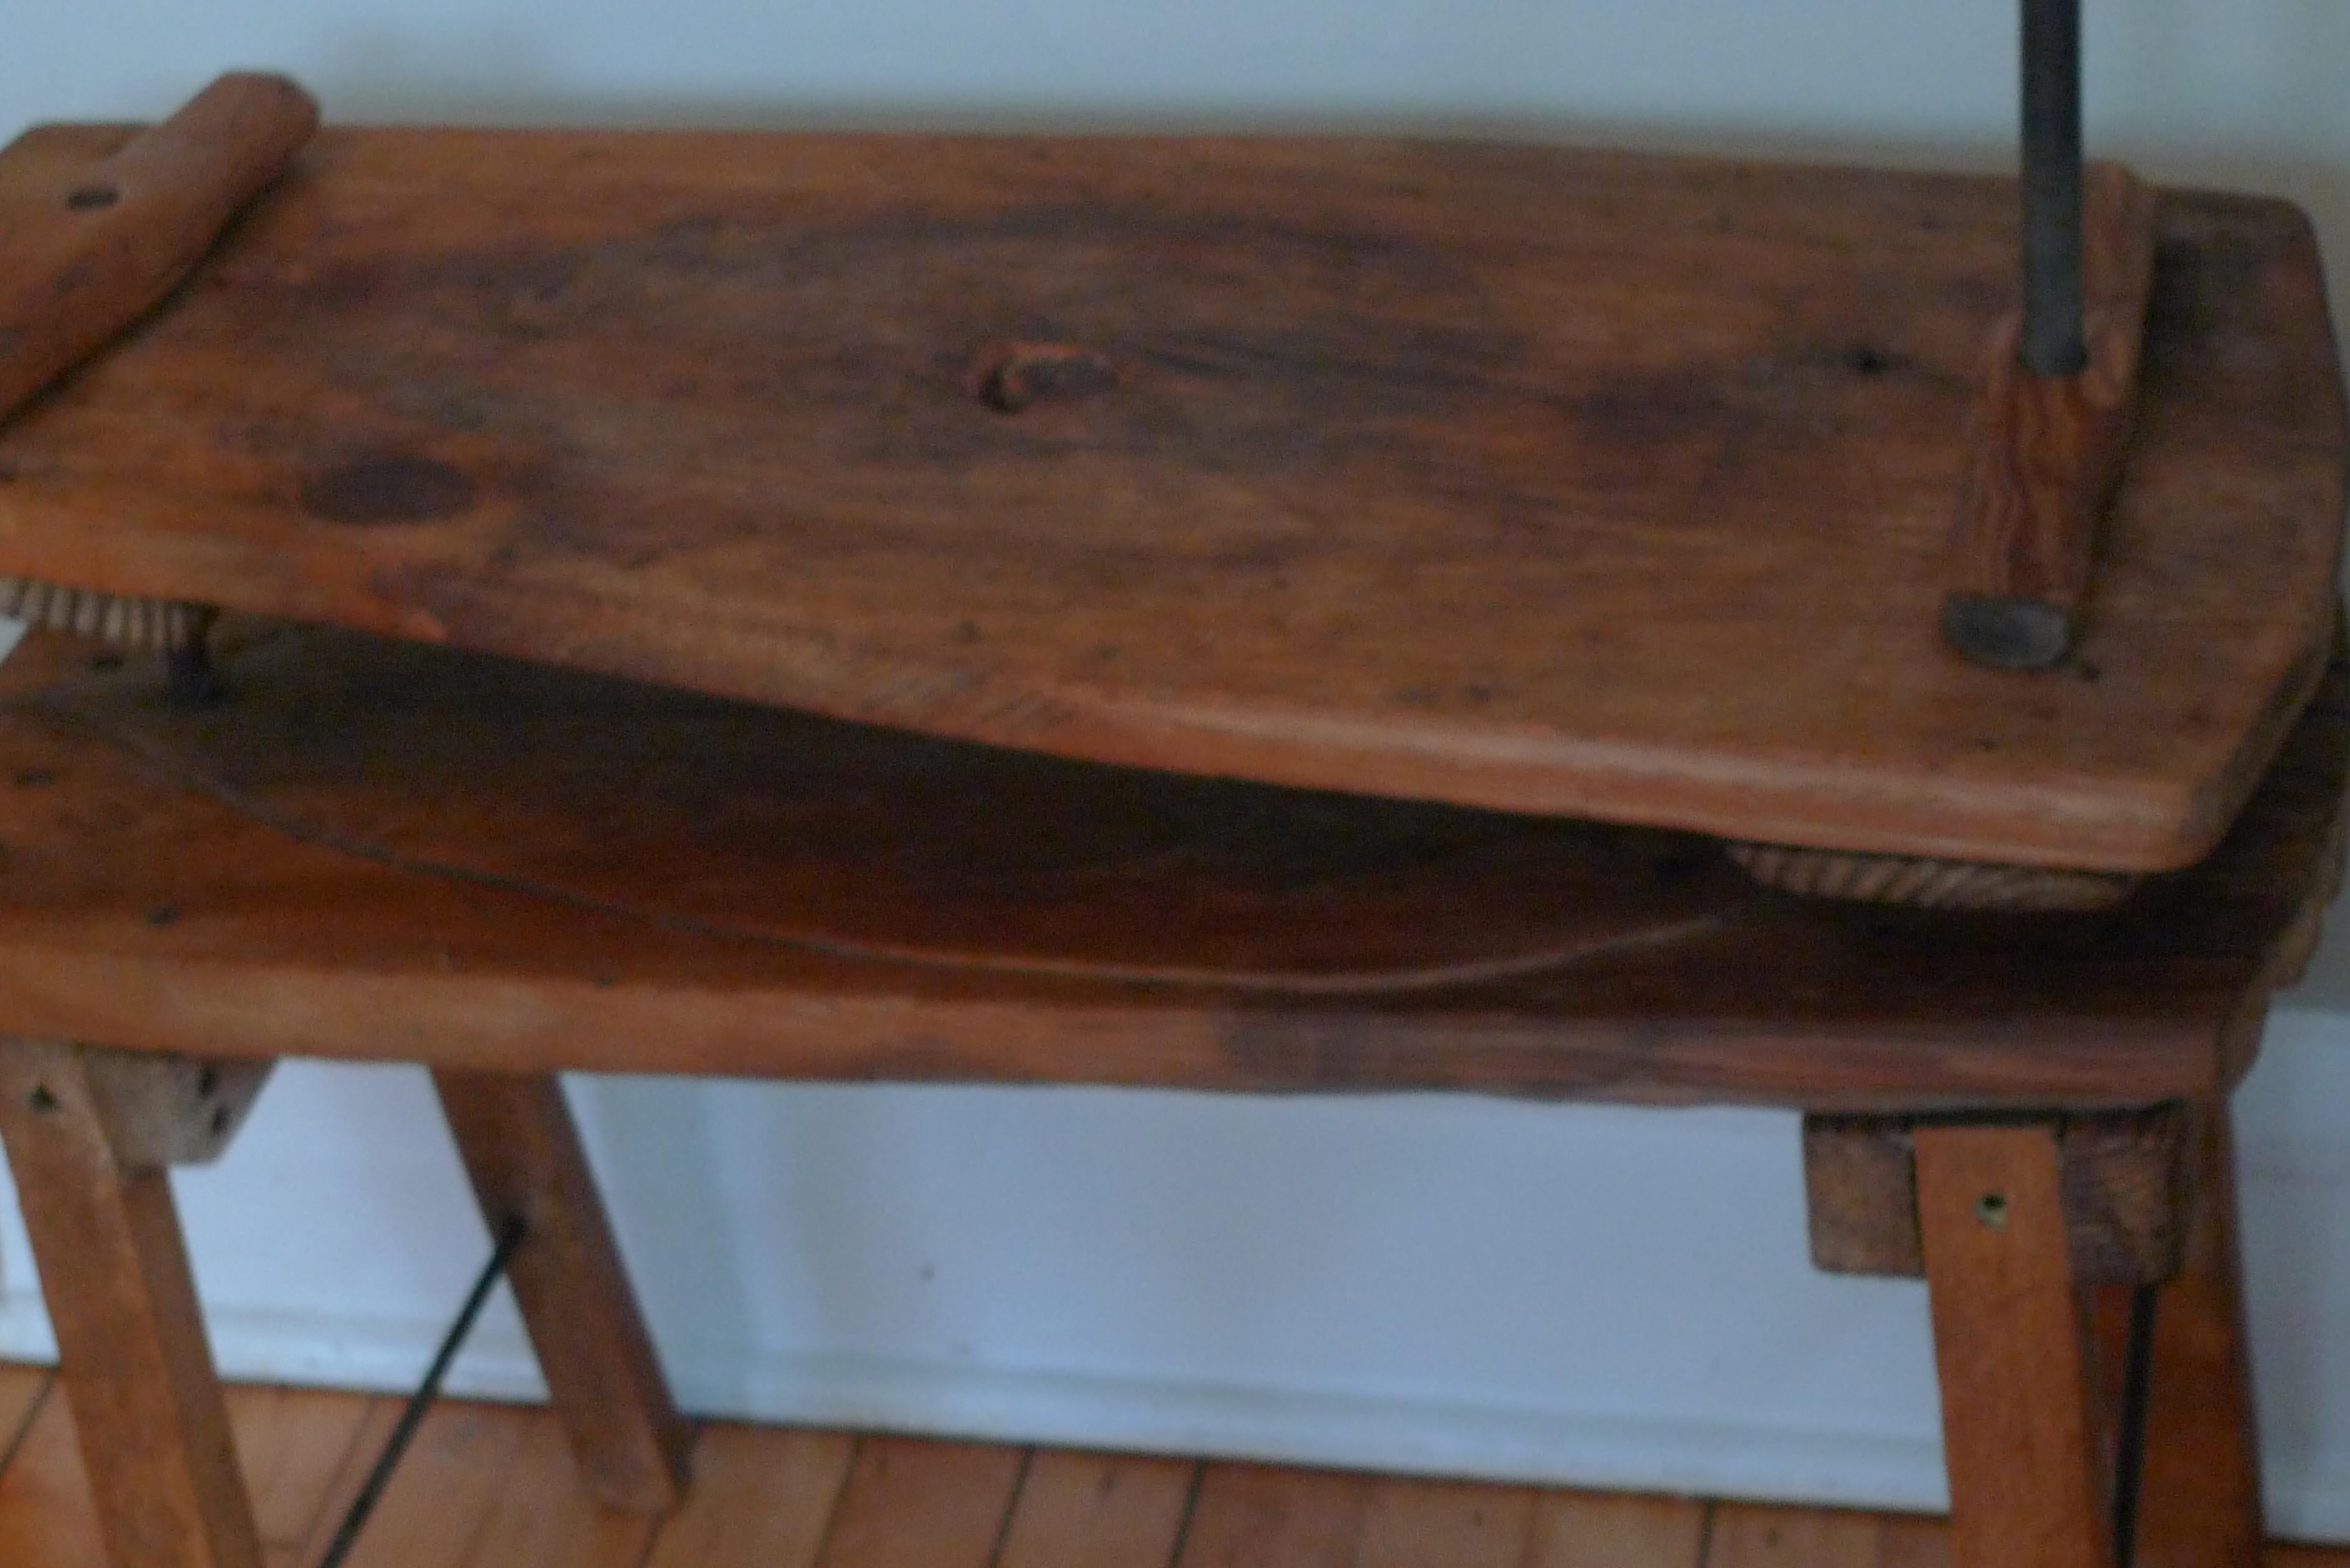 French country wooden cheese press, 19th century, as unique end table. Agrarian Classic. The wood is ancient and patinated. A level surface is attained by adjusting screwed posts to varying heights and configurations. The table that results is a